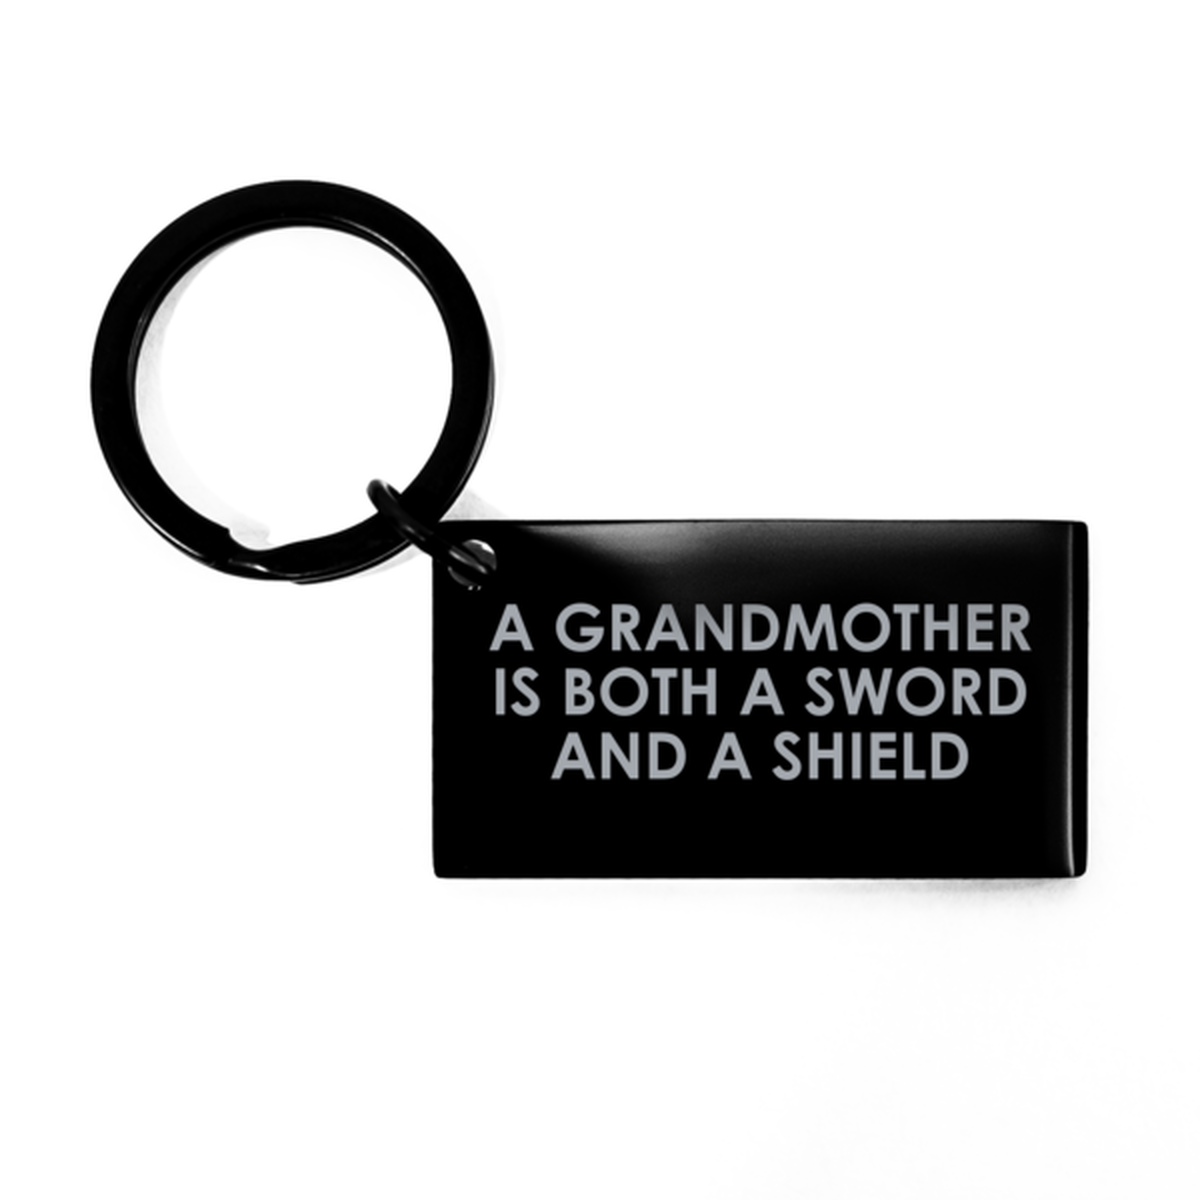 To My Grandma Black Keychain, Sword And A Shield, Mothers Day Gifts For Grandma From Granddaughter, Birthday Gifts For Women